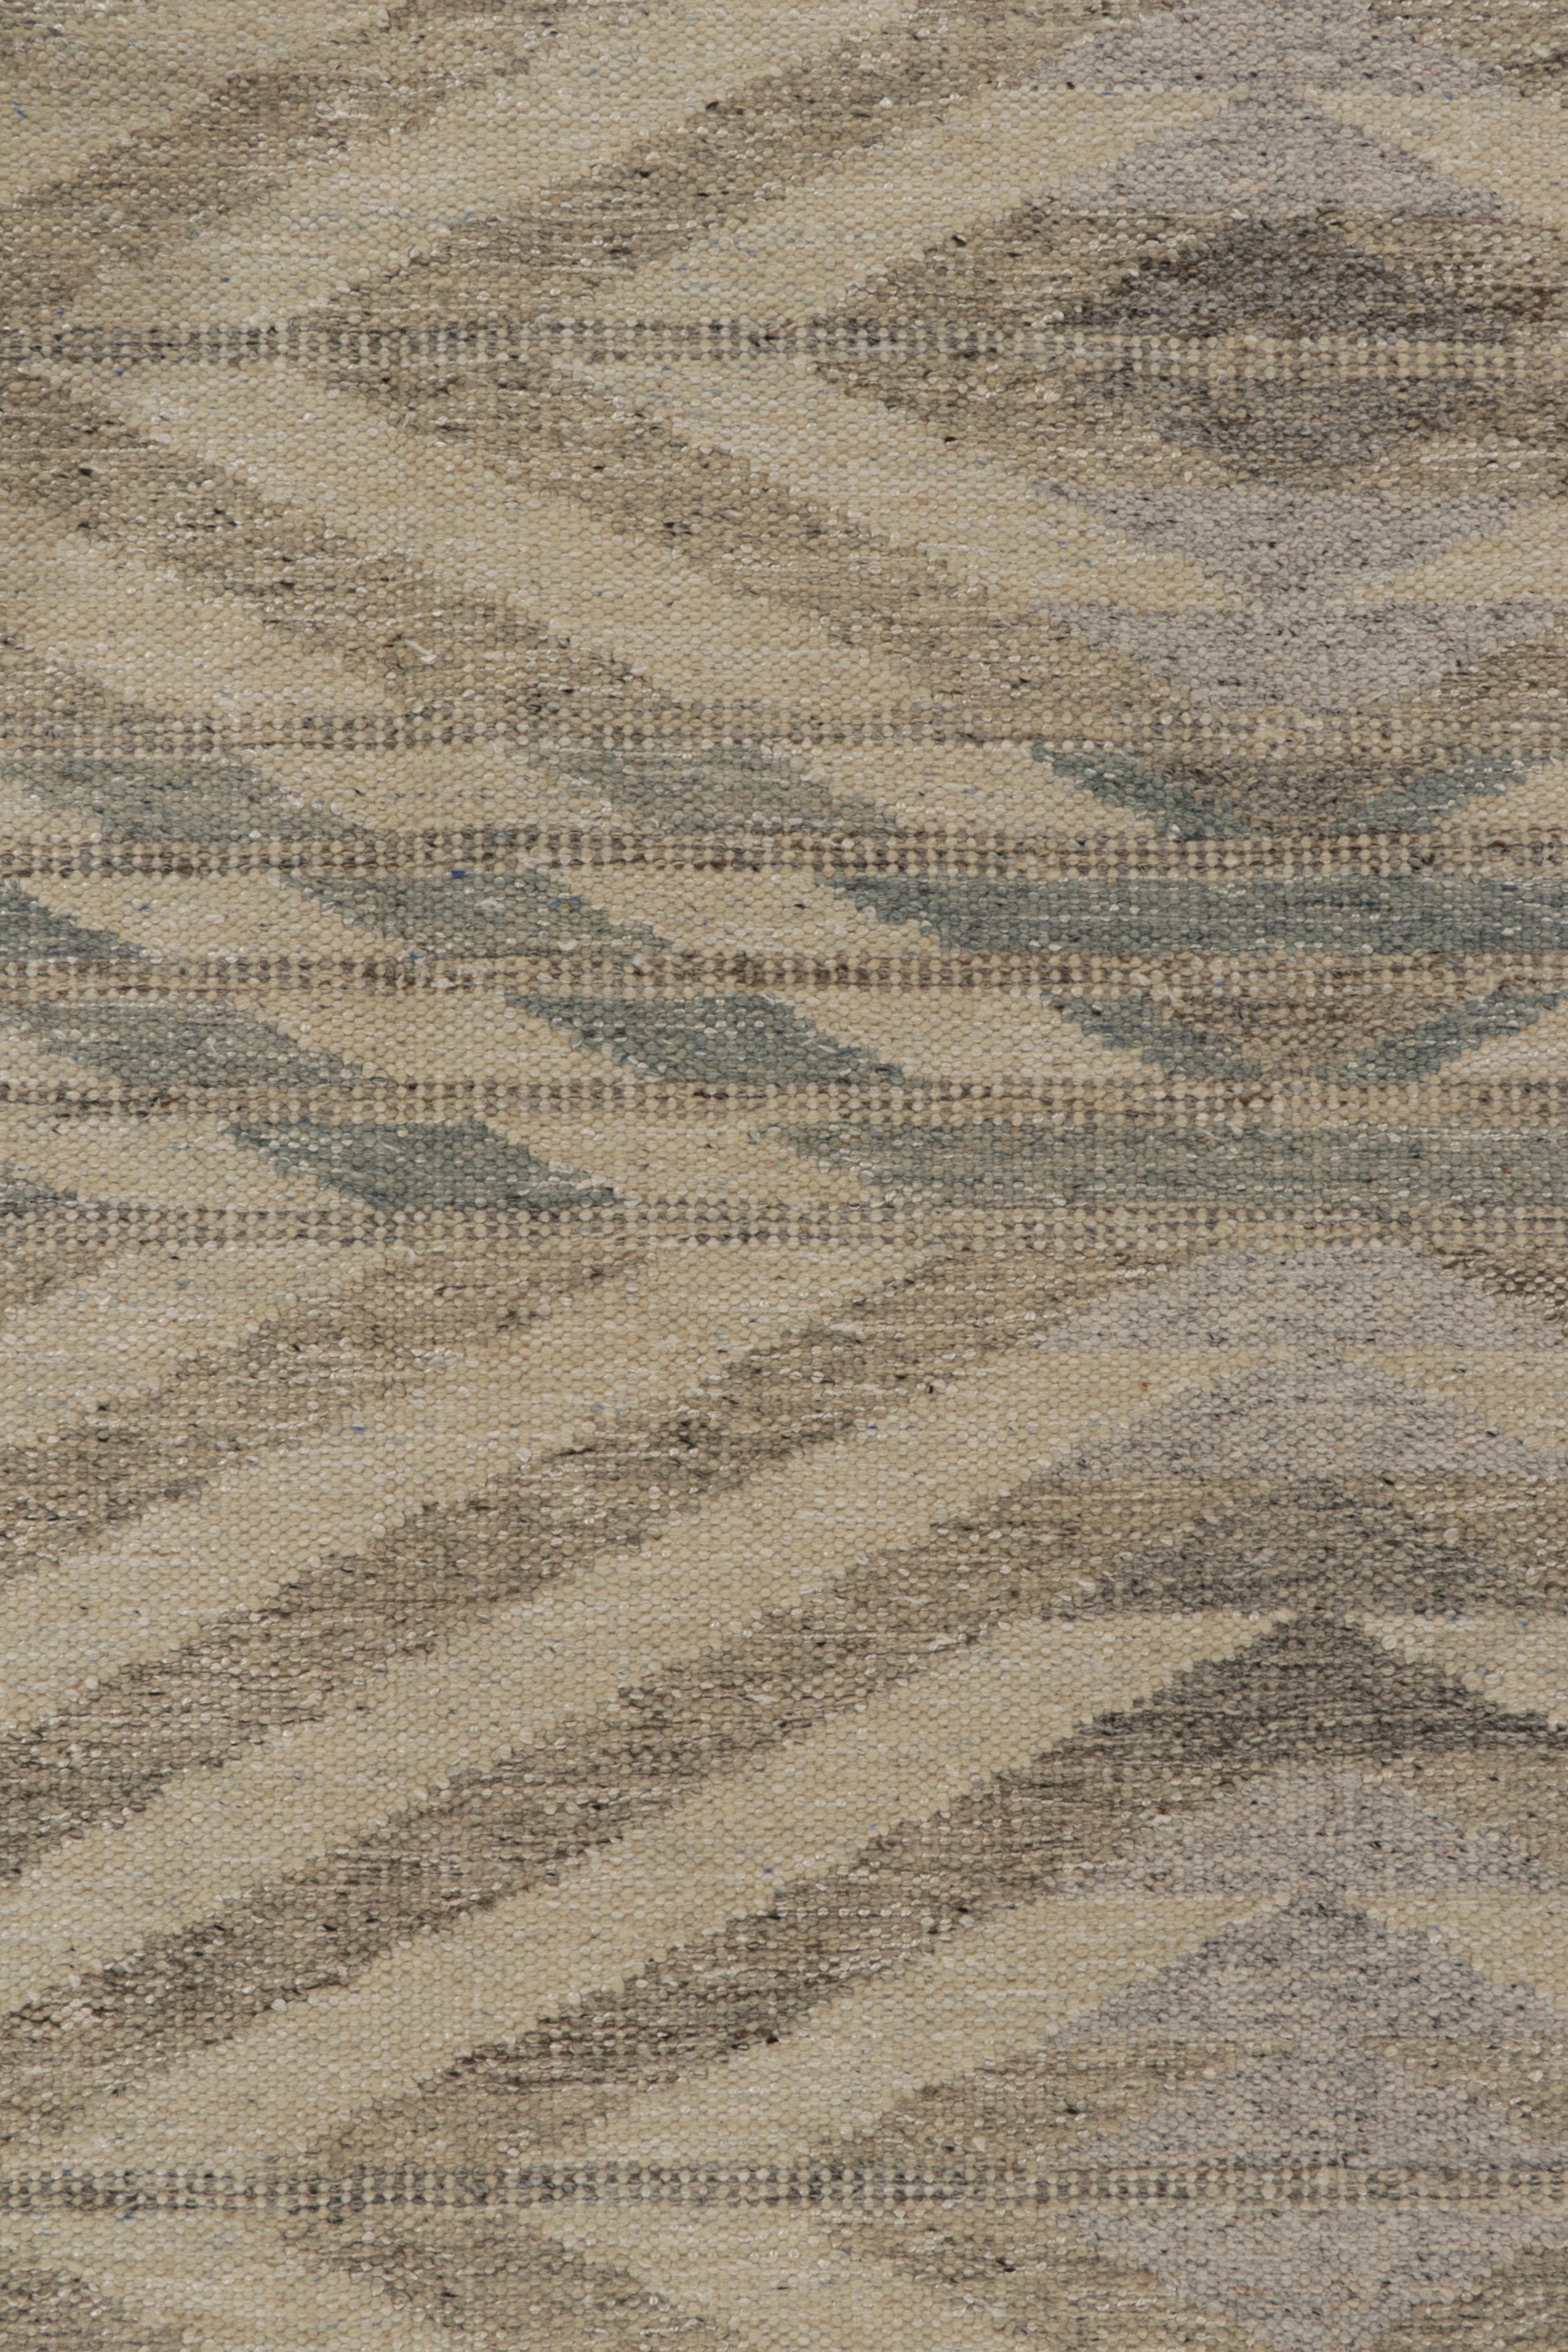 Hand-Knotted Rug & Kilim’s Scandinavian style Kilim in Beige-Brown and Blue Chevrons For Sale